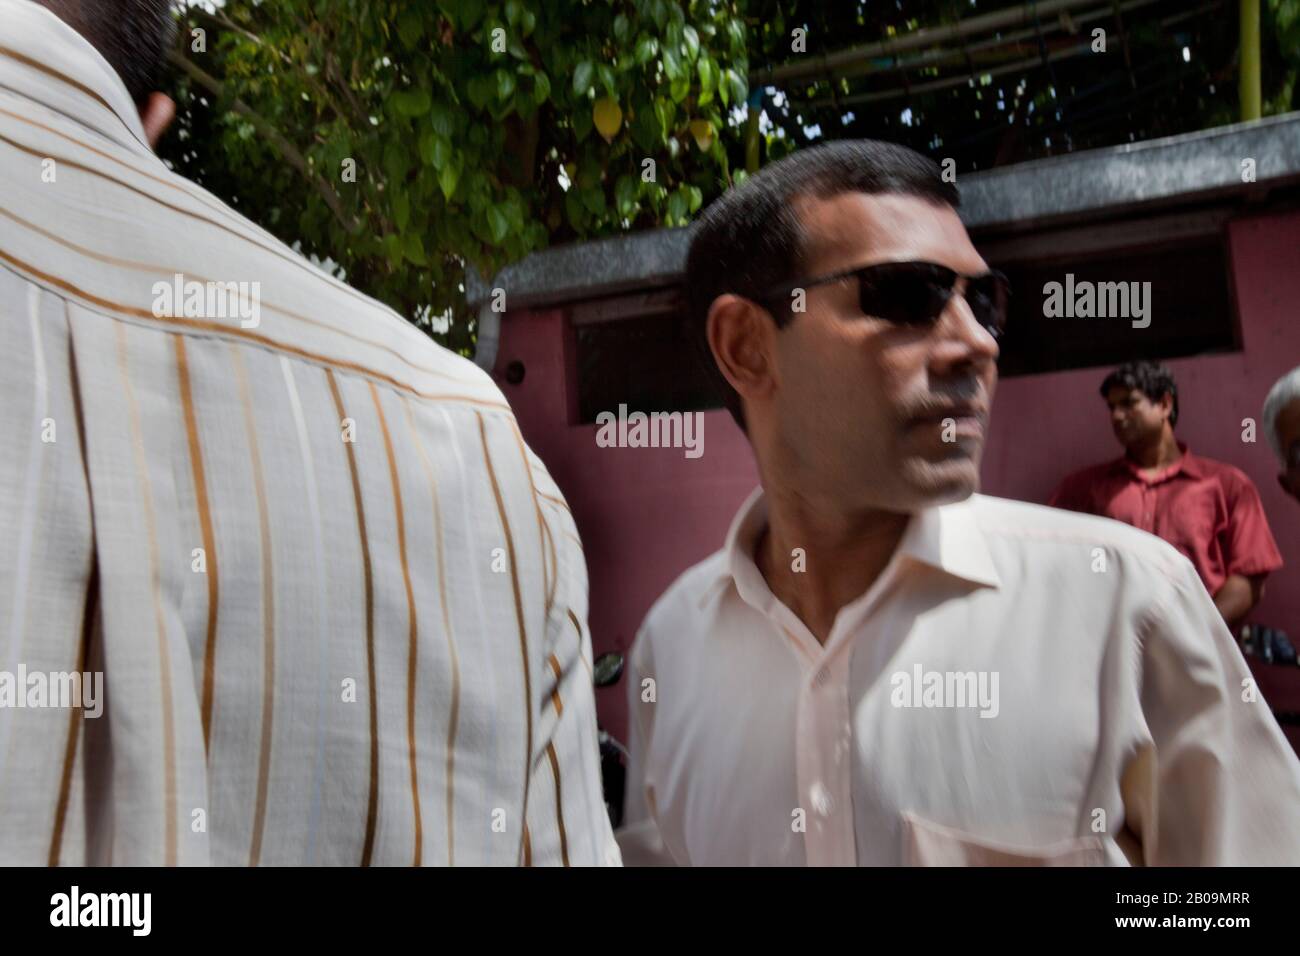 Mohamed Nasheed, is a Maldivian politician, who served as the fourth President of the Maldives from 2008 to 2012. He was the first democratically elected president of the Maldives and one of the founders of the Maldivian Democratic Party. Stock Photo